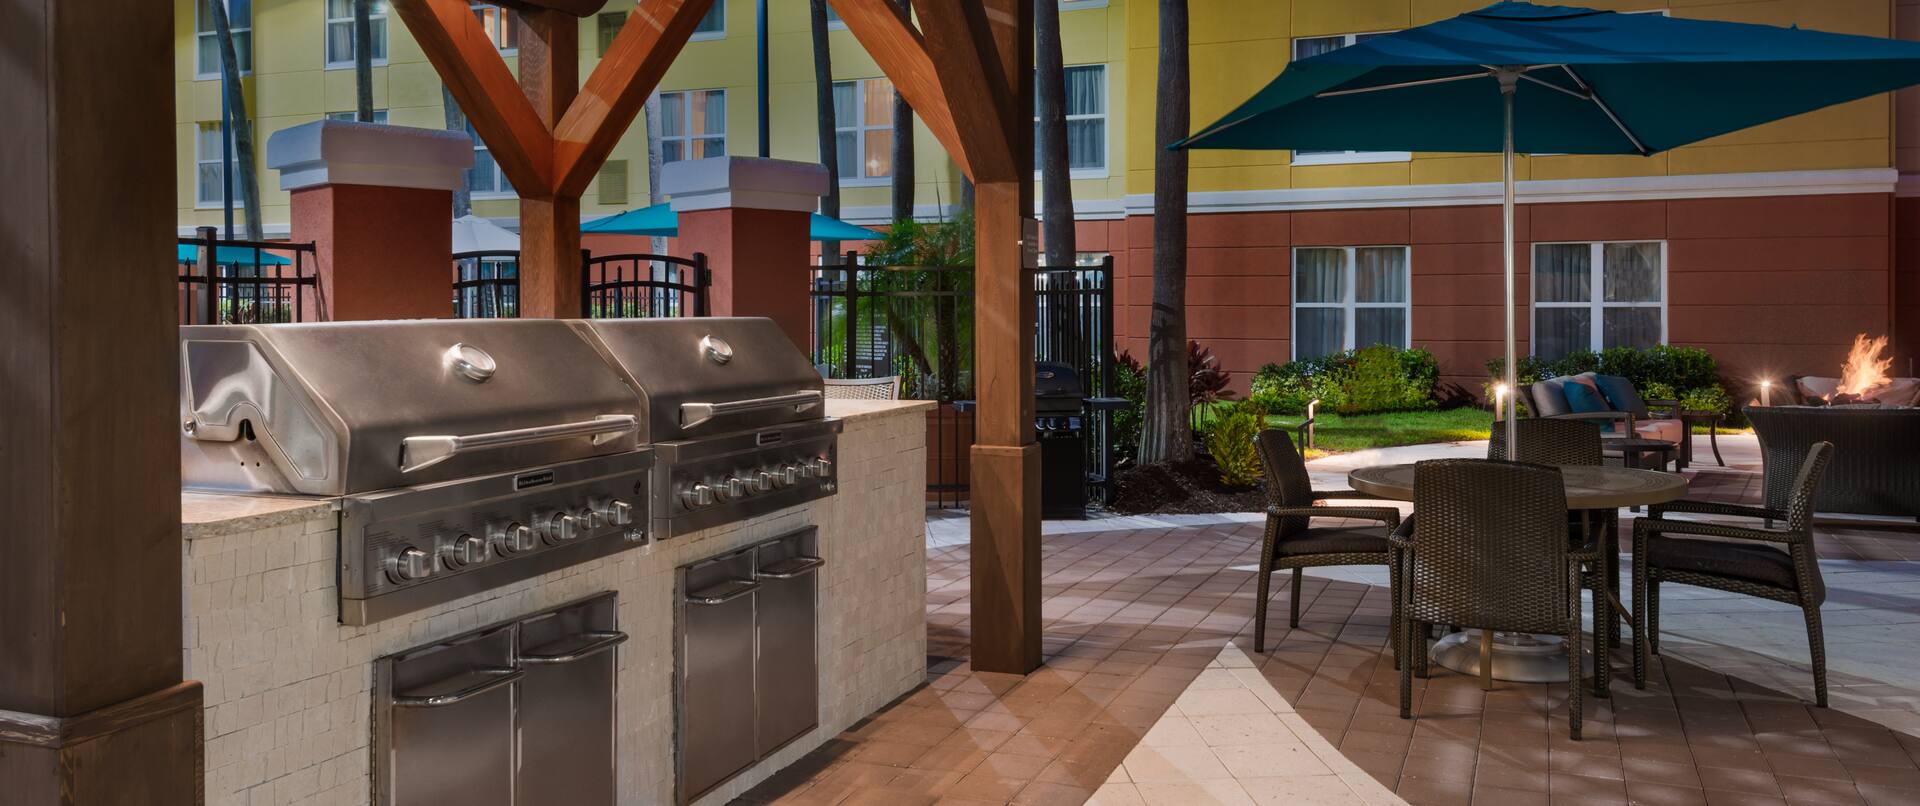 Outdoor Patio Area with grills and seating